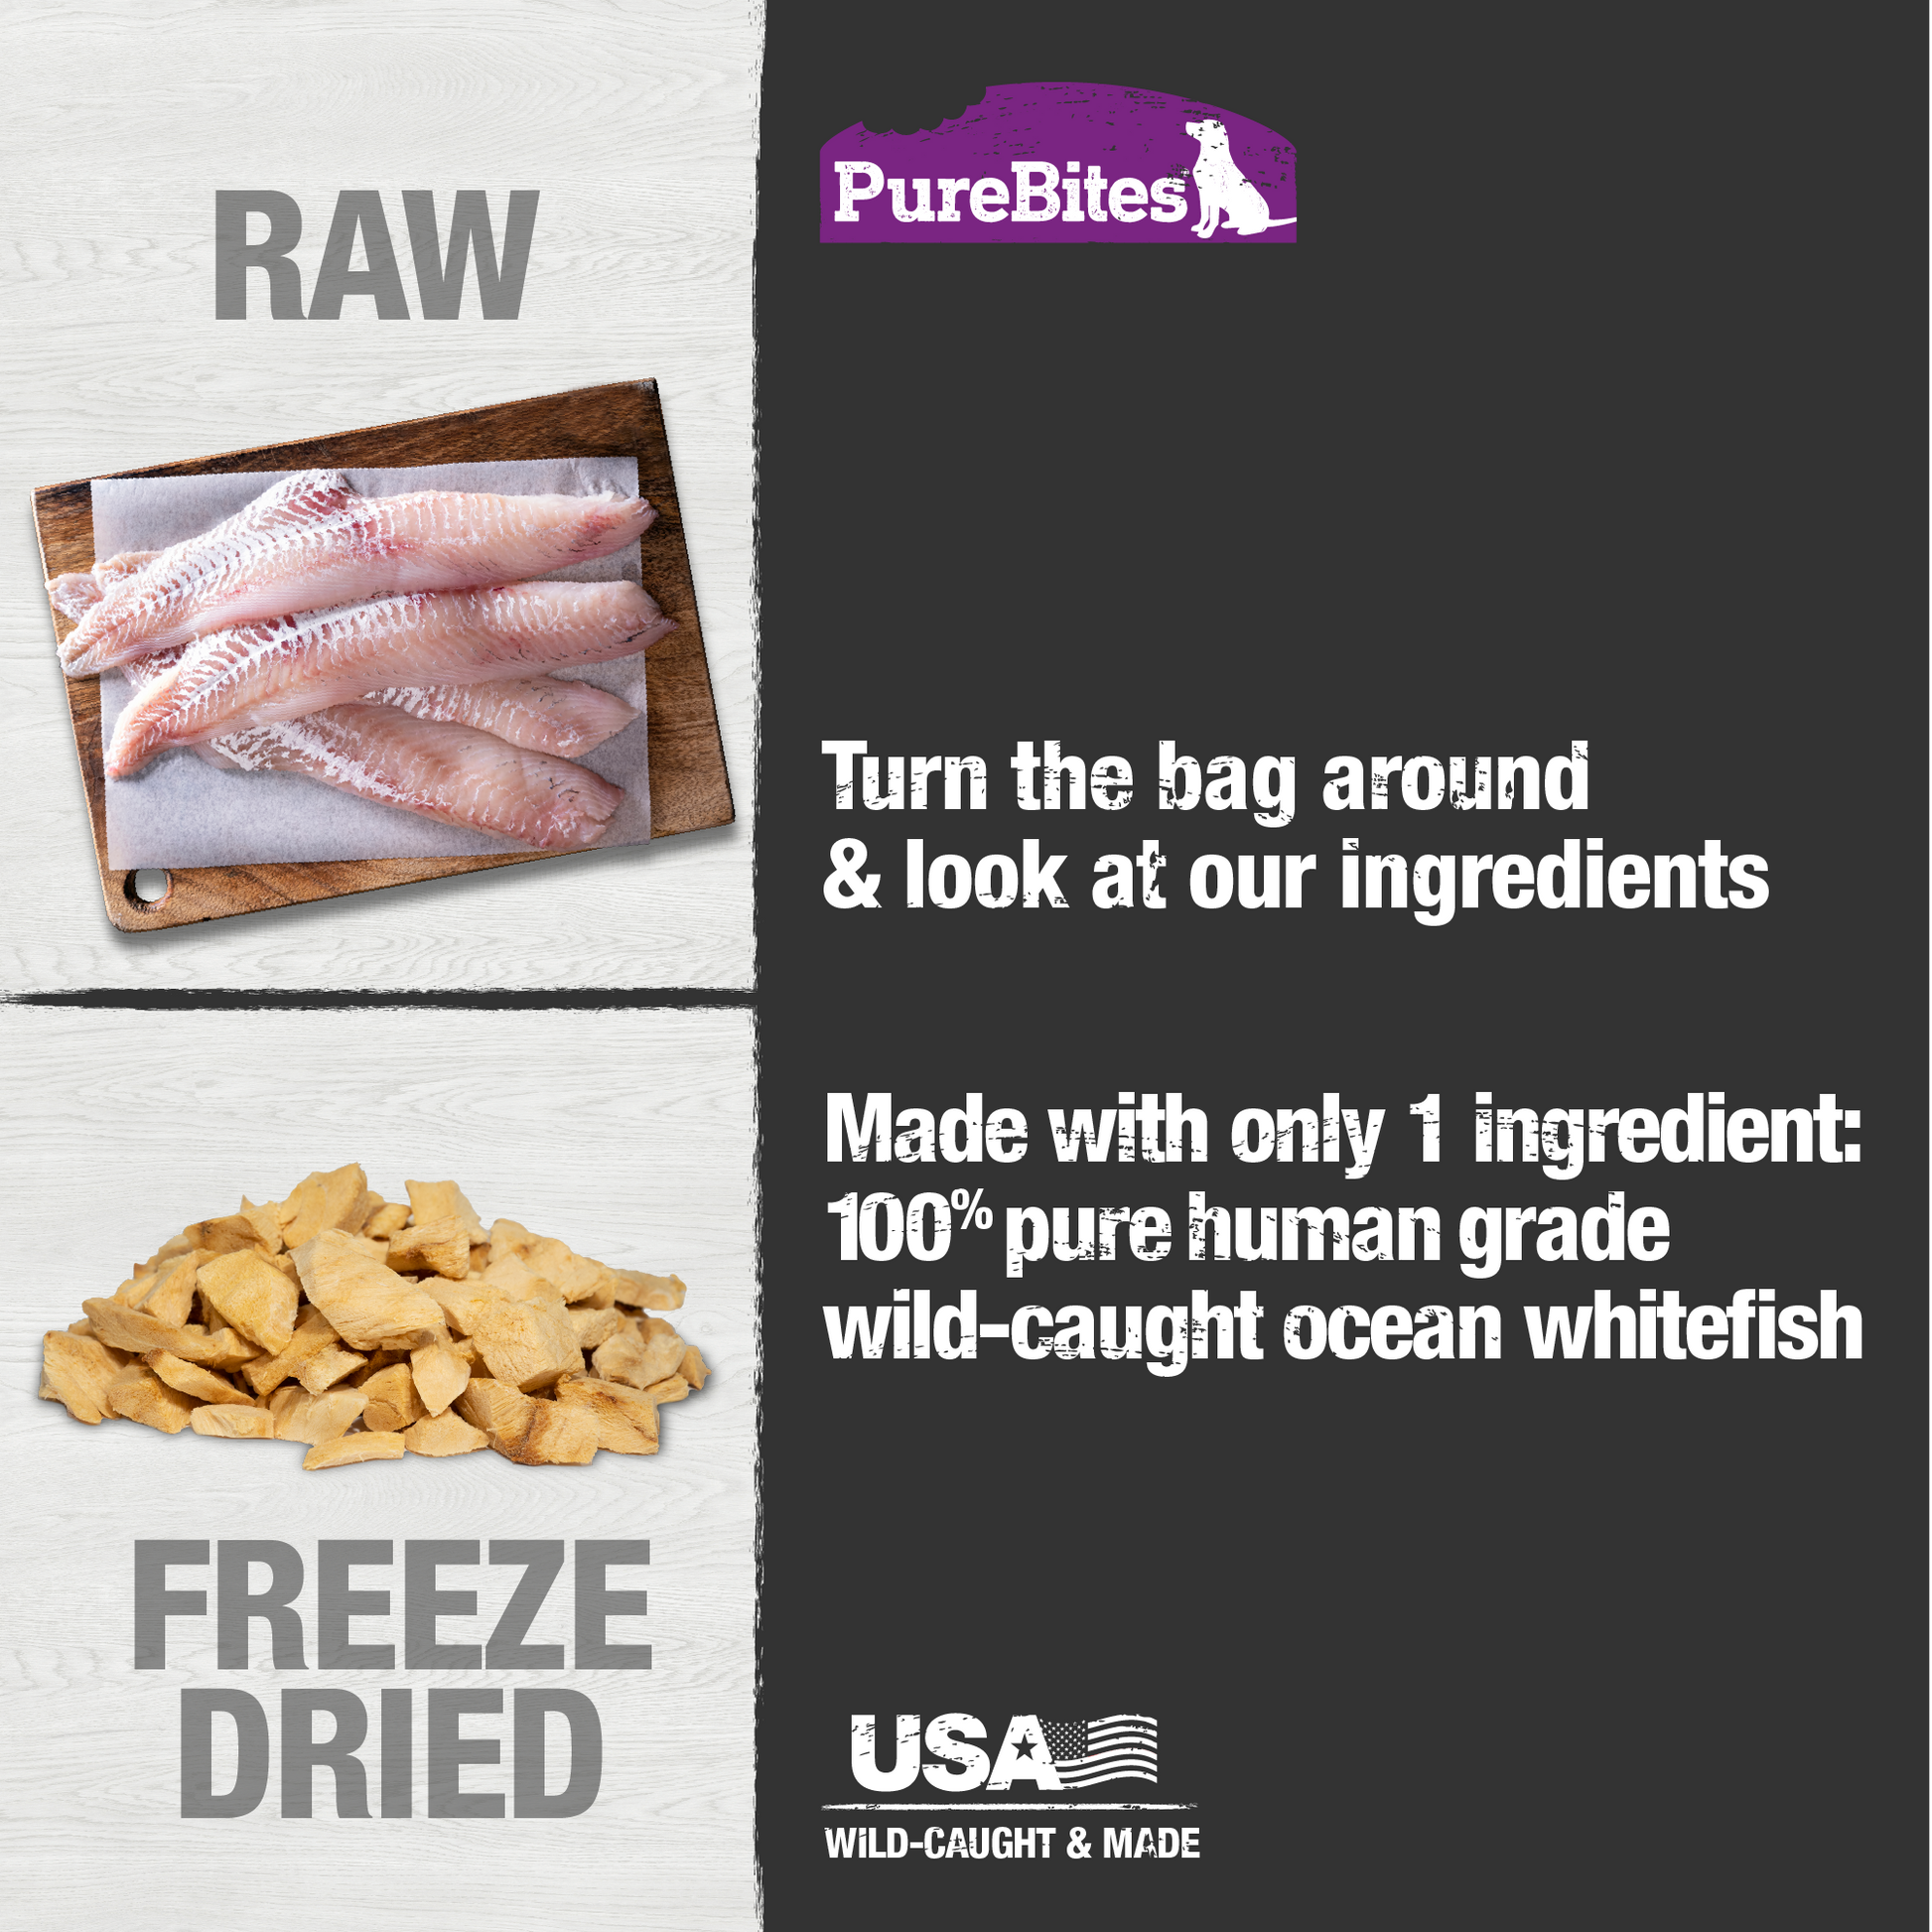 Made with only 1 Ingredient you can read, pronounce, and trust: USA sourced wild-caught human grade ocean whitefish.